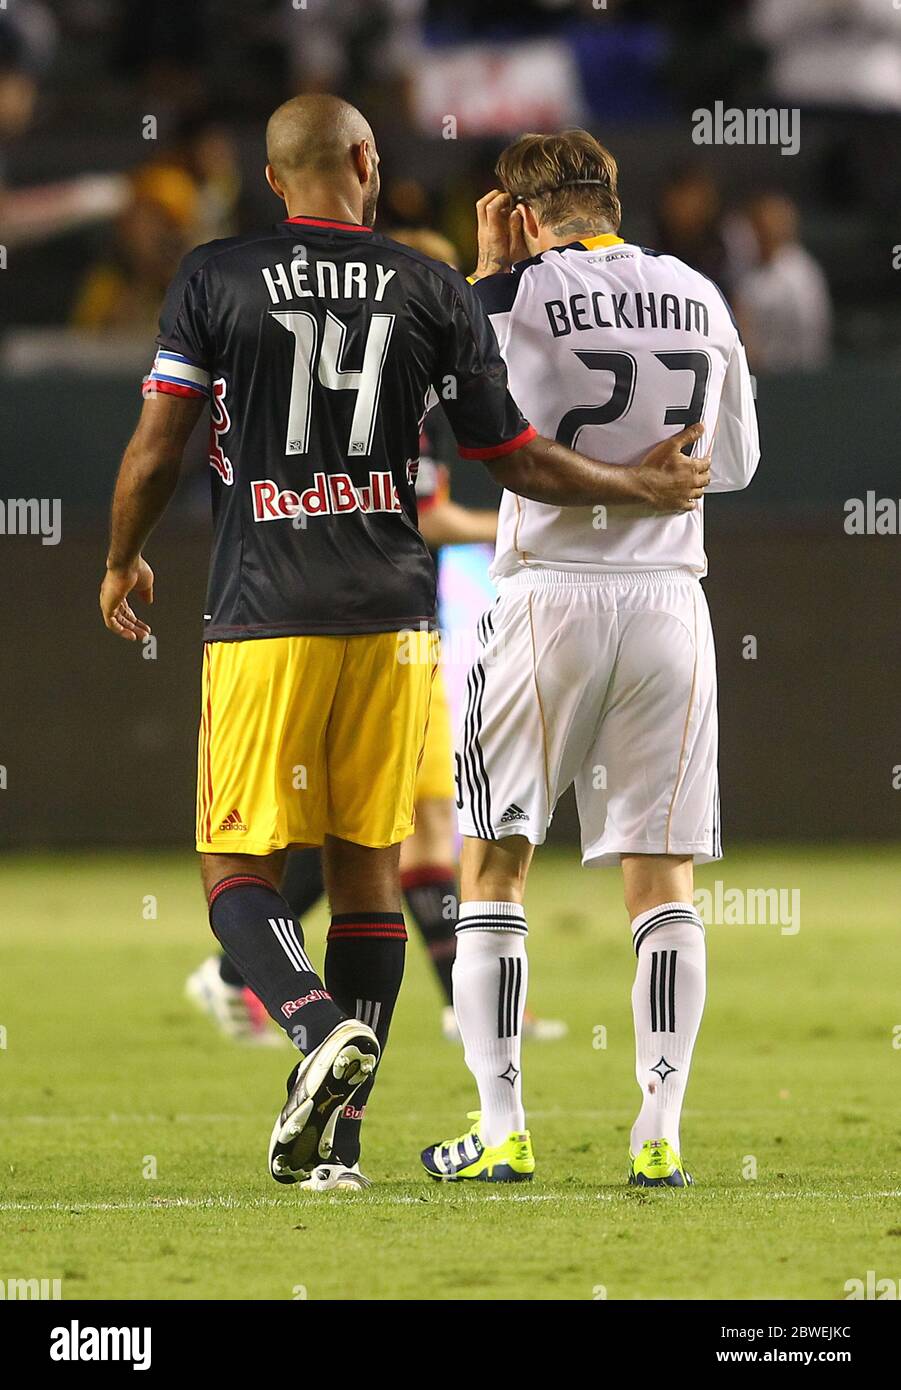 David Beckham in action for Los Angeles Galaxy v New York Red Bulls in the  MLS Play Off match in Carson, California. David and Thiery Henry got close  during the match and